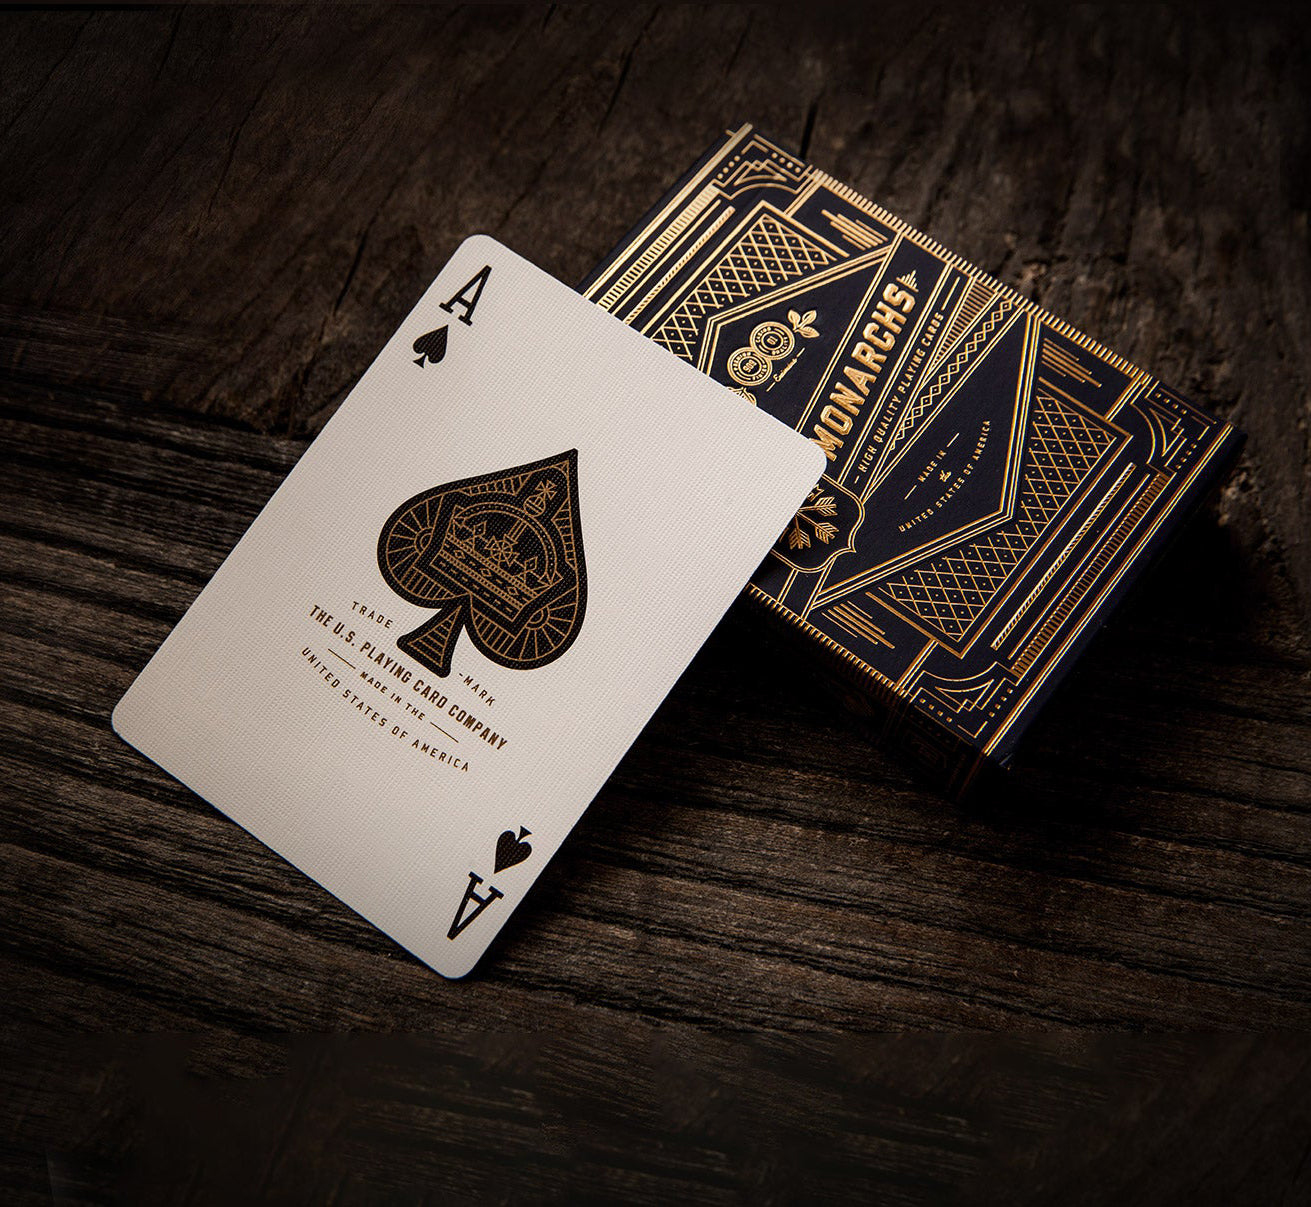 Monarchs Playing Cards